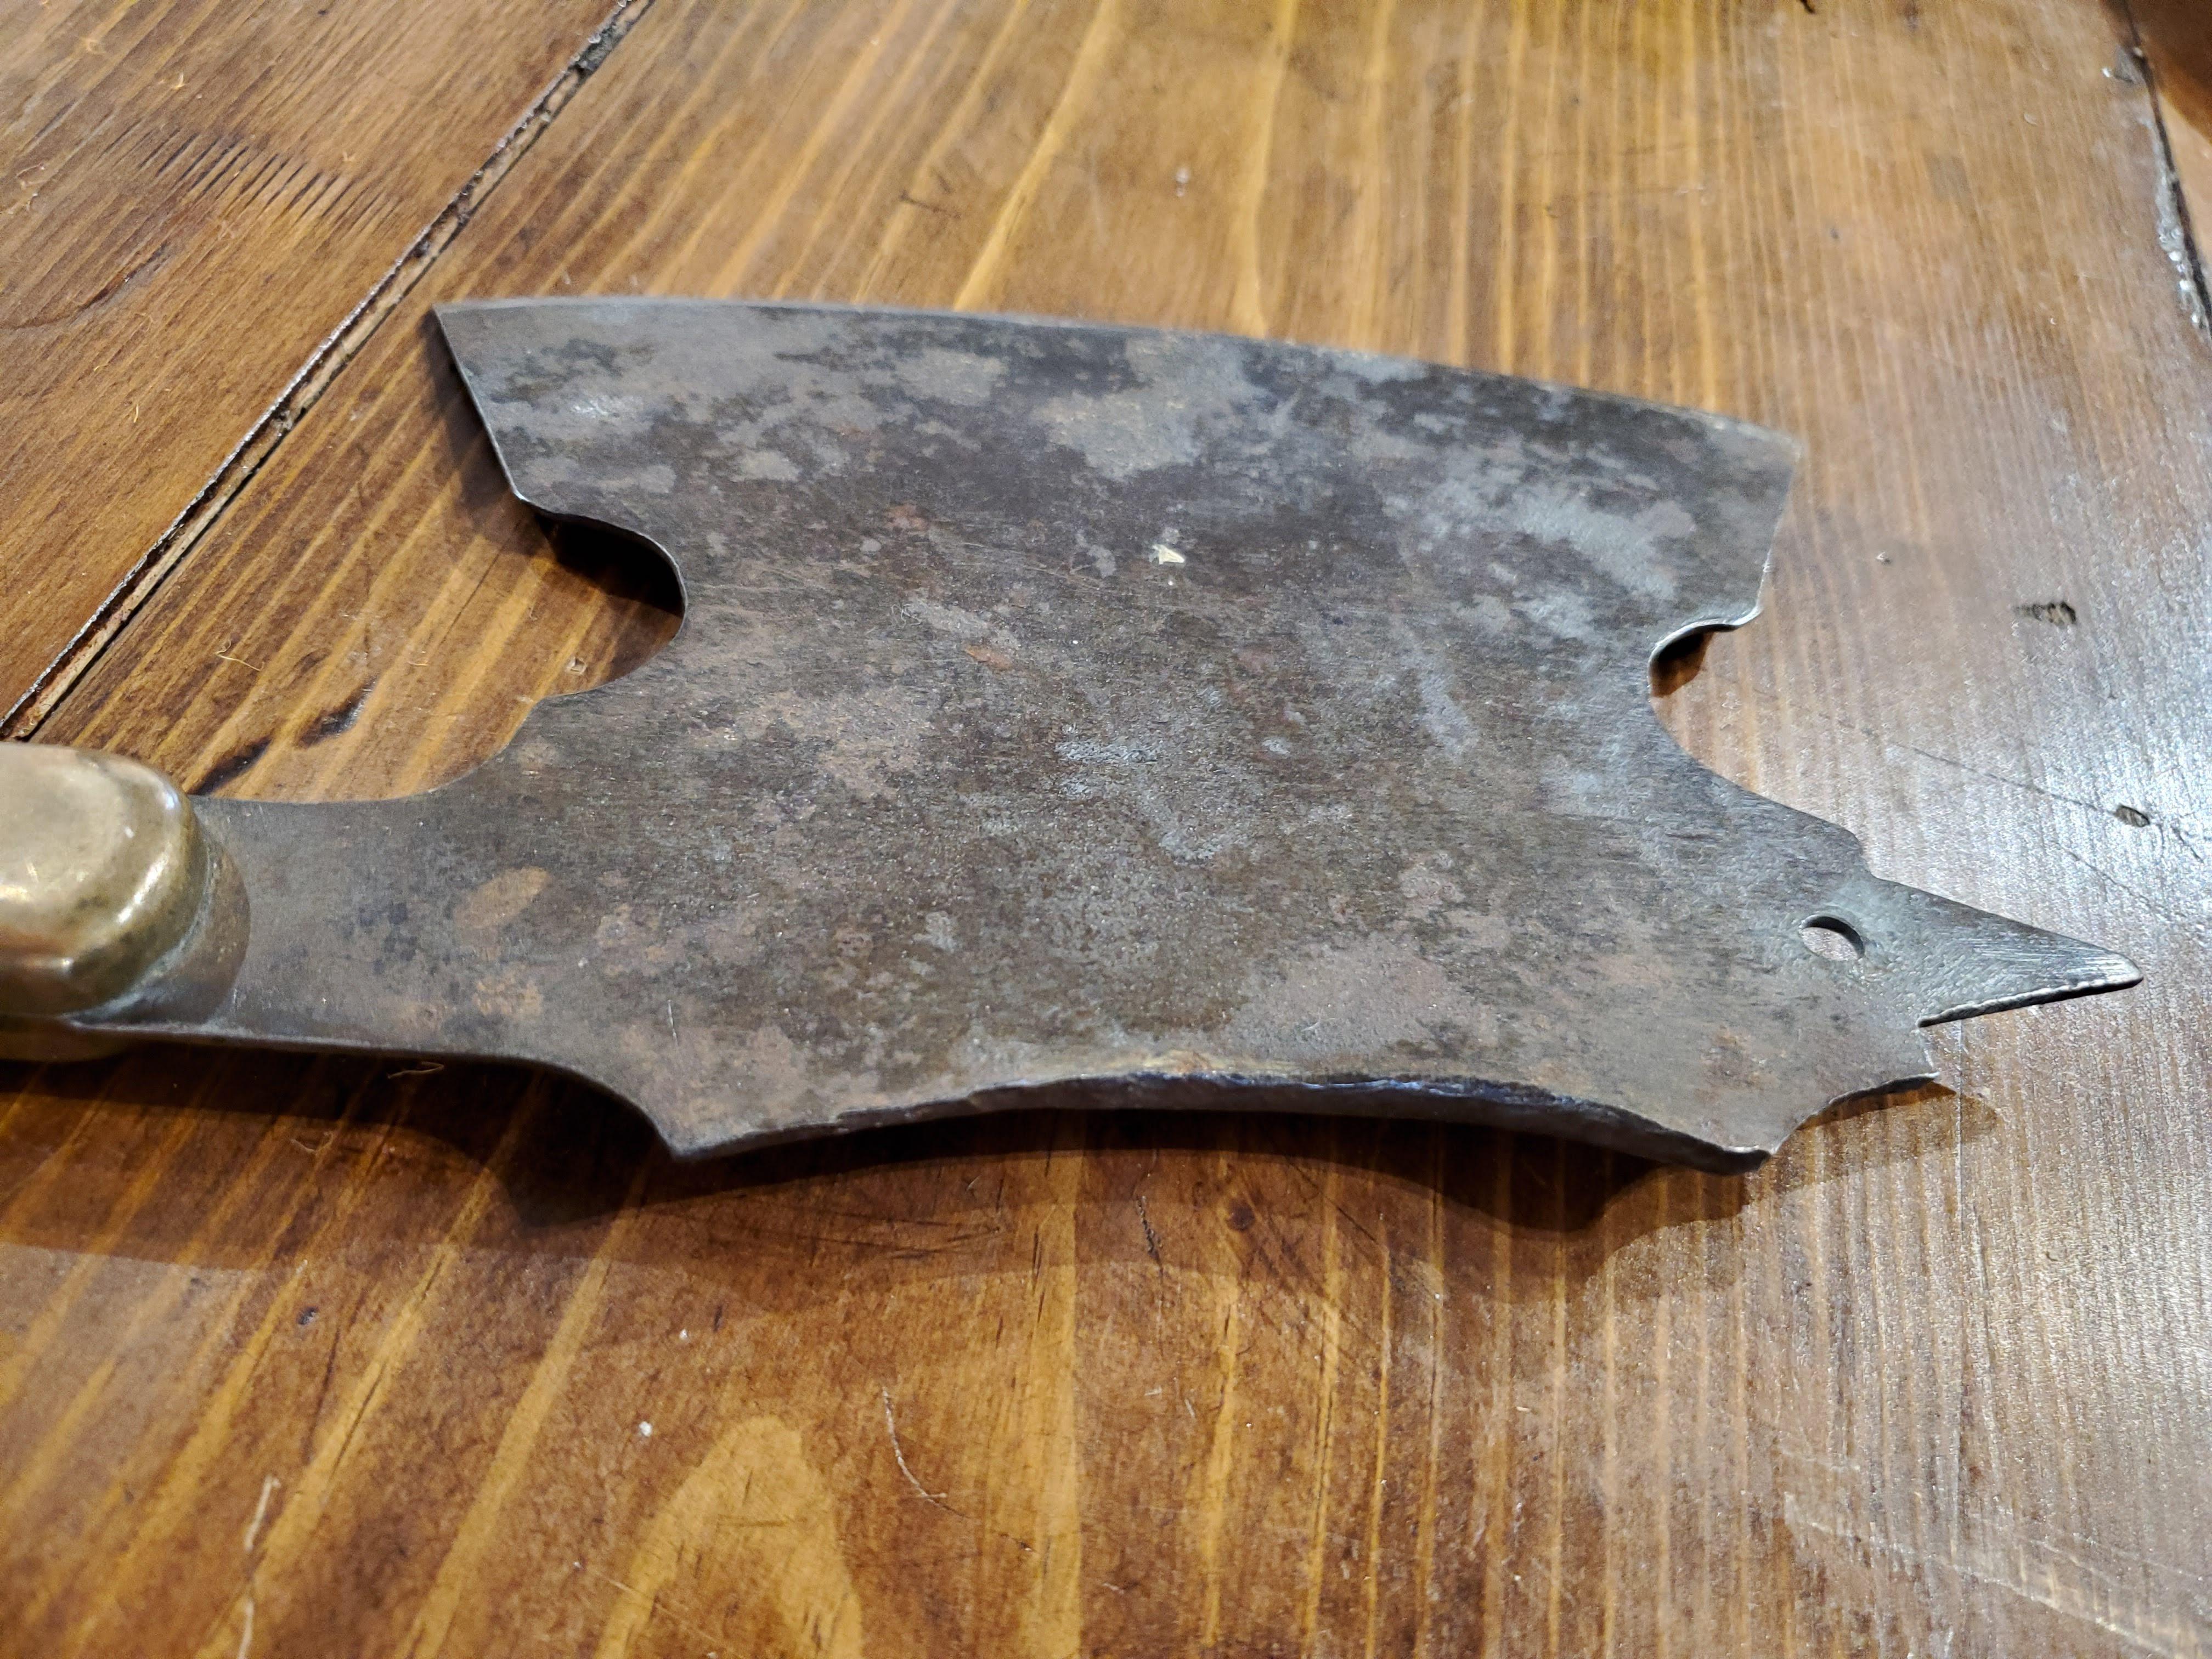 19th Century Steel and Bronze Virginian Tobacco Hatchet In Good Condition For Sale In Middleburg, VA